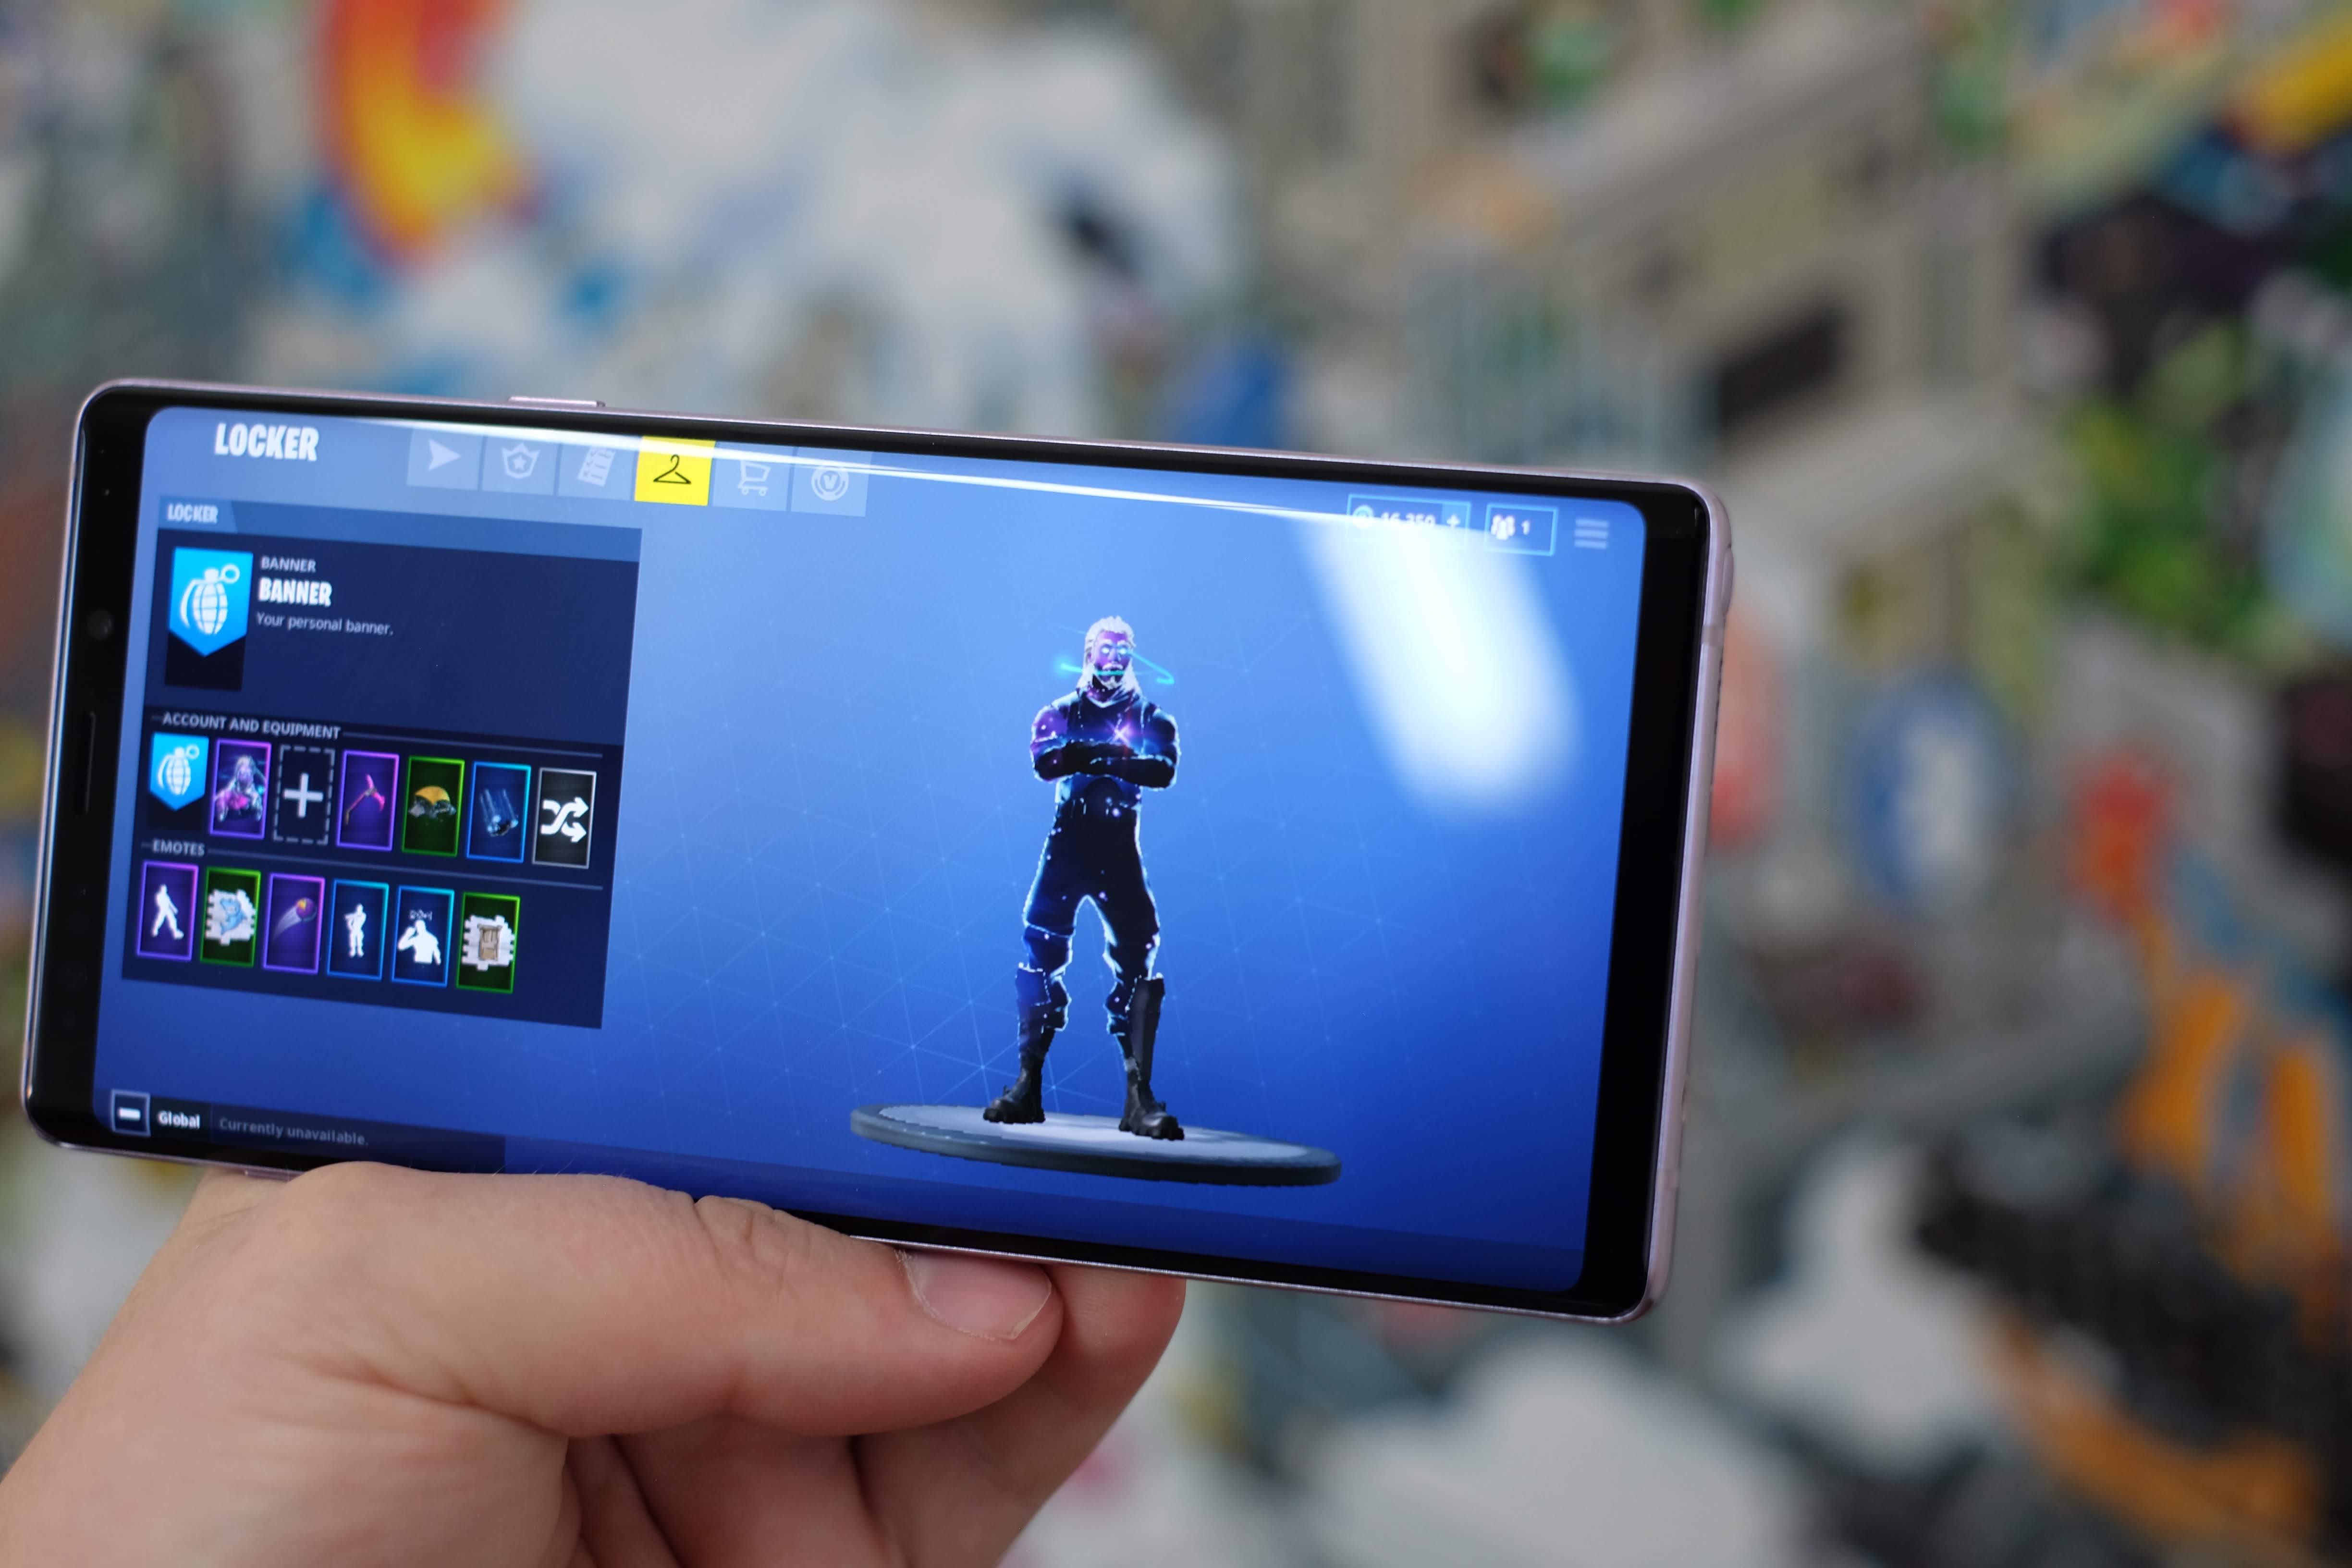 Fortnite Note 9 Deal Samsung Note 9 Users Here S Your Chance To Play Fortnite With Ninja Zdnet